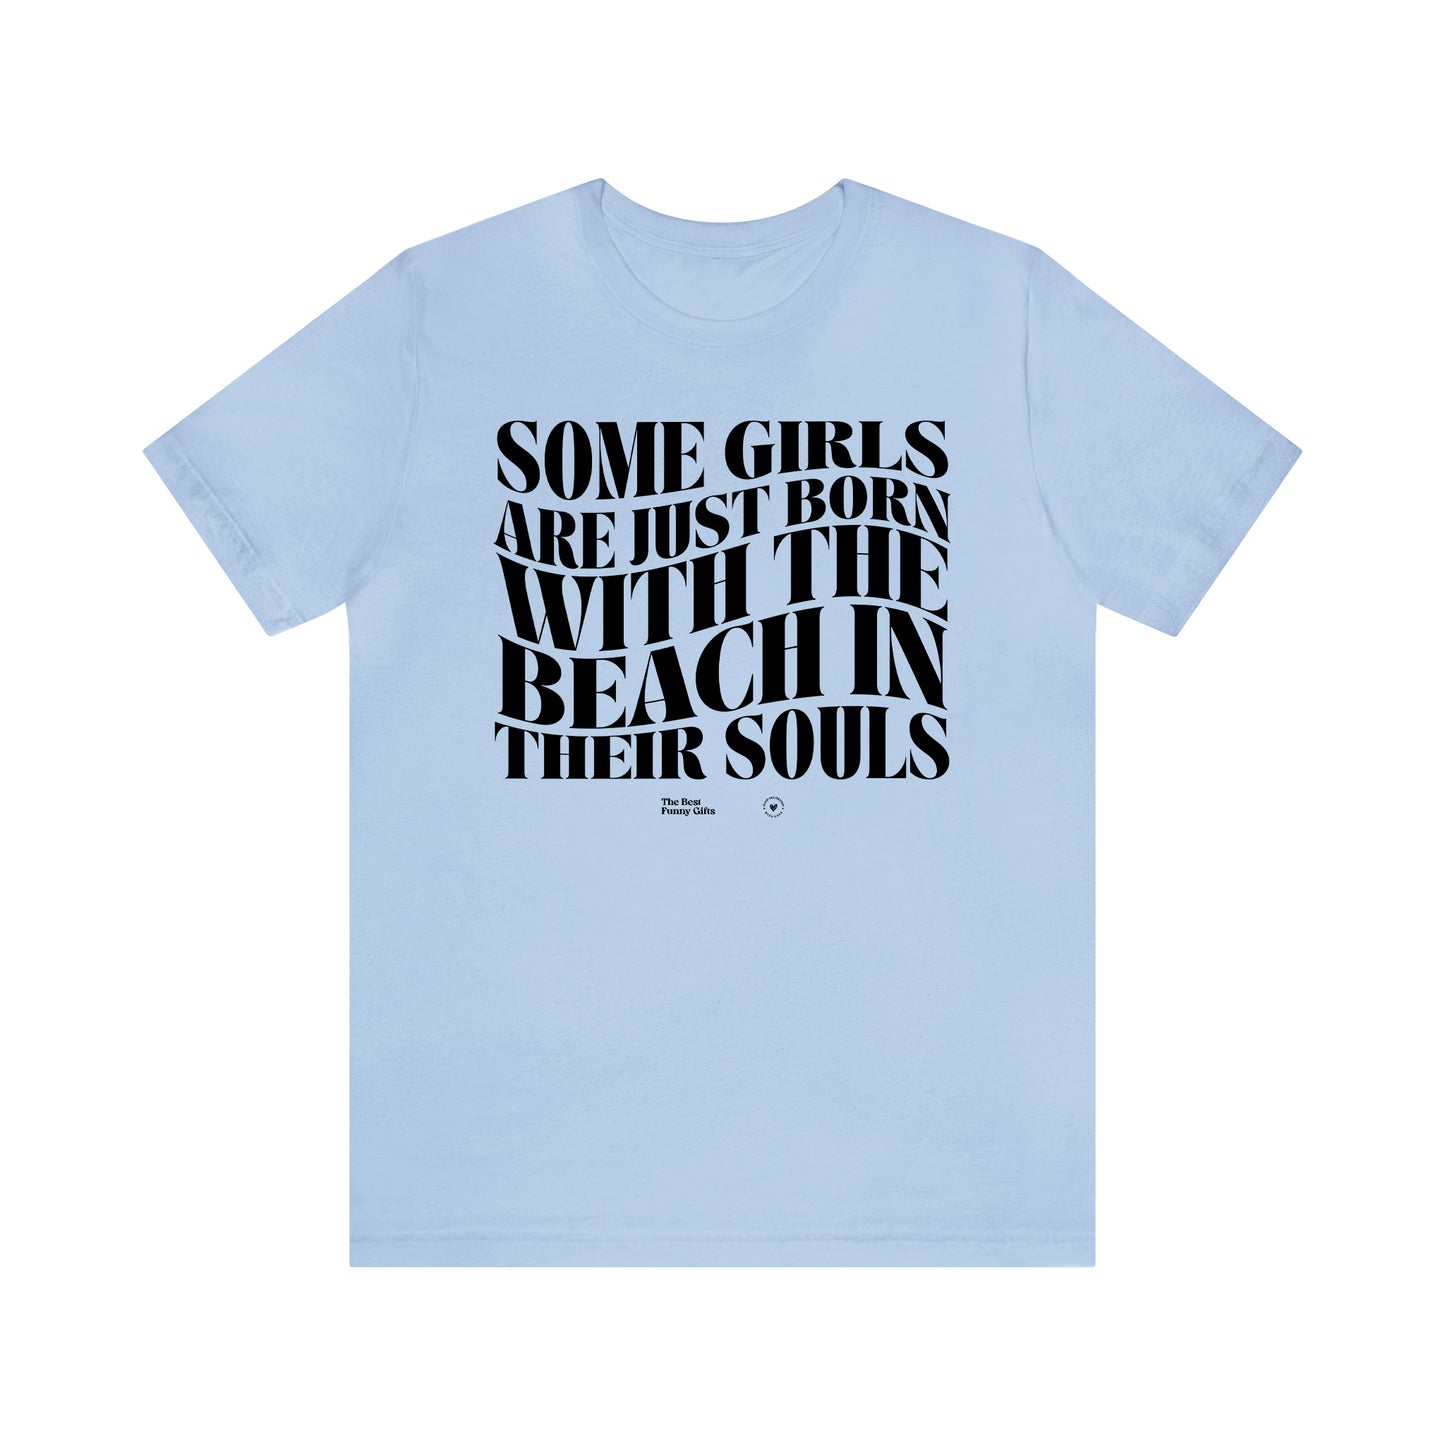 Funny Shirts for Women - Some Girls Are Just Born With the Beach in Their Souls - Women’s T Shirts